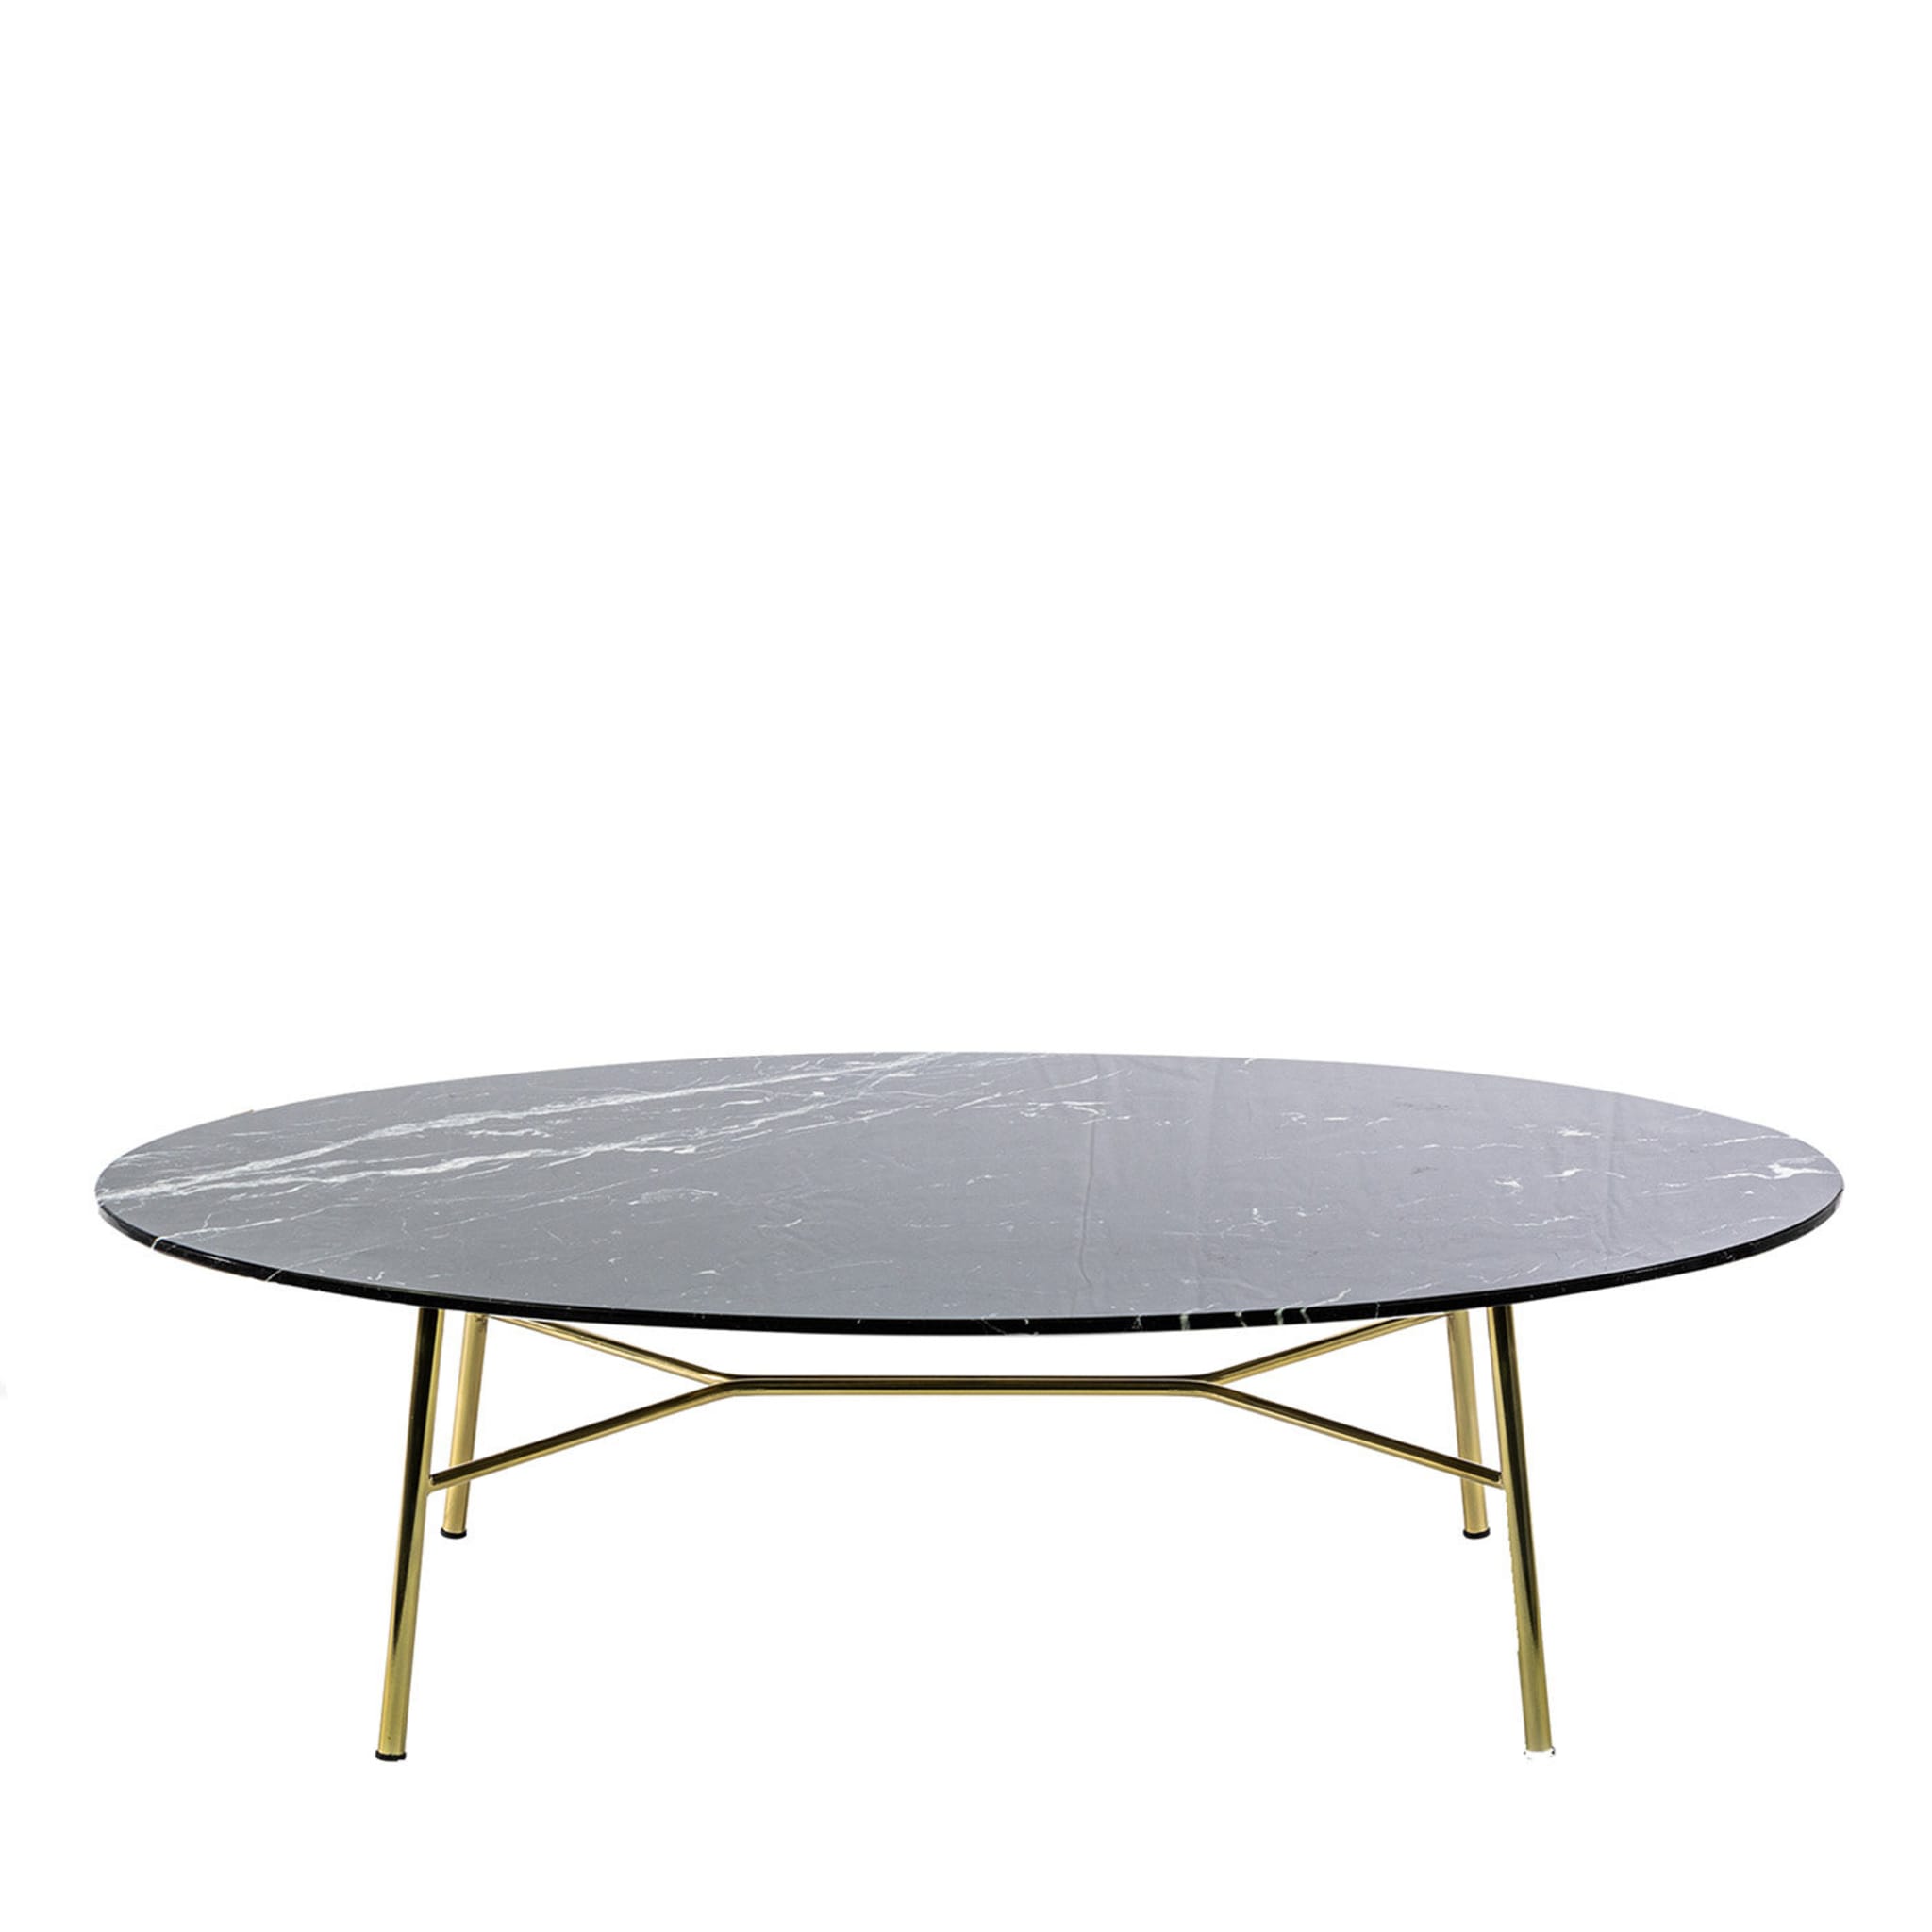 Yuki Oval Coffee Table with Black Marquinia Top # 2 by Ep Studio - Main view